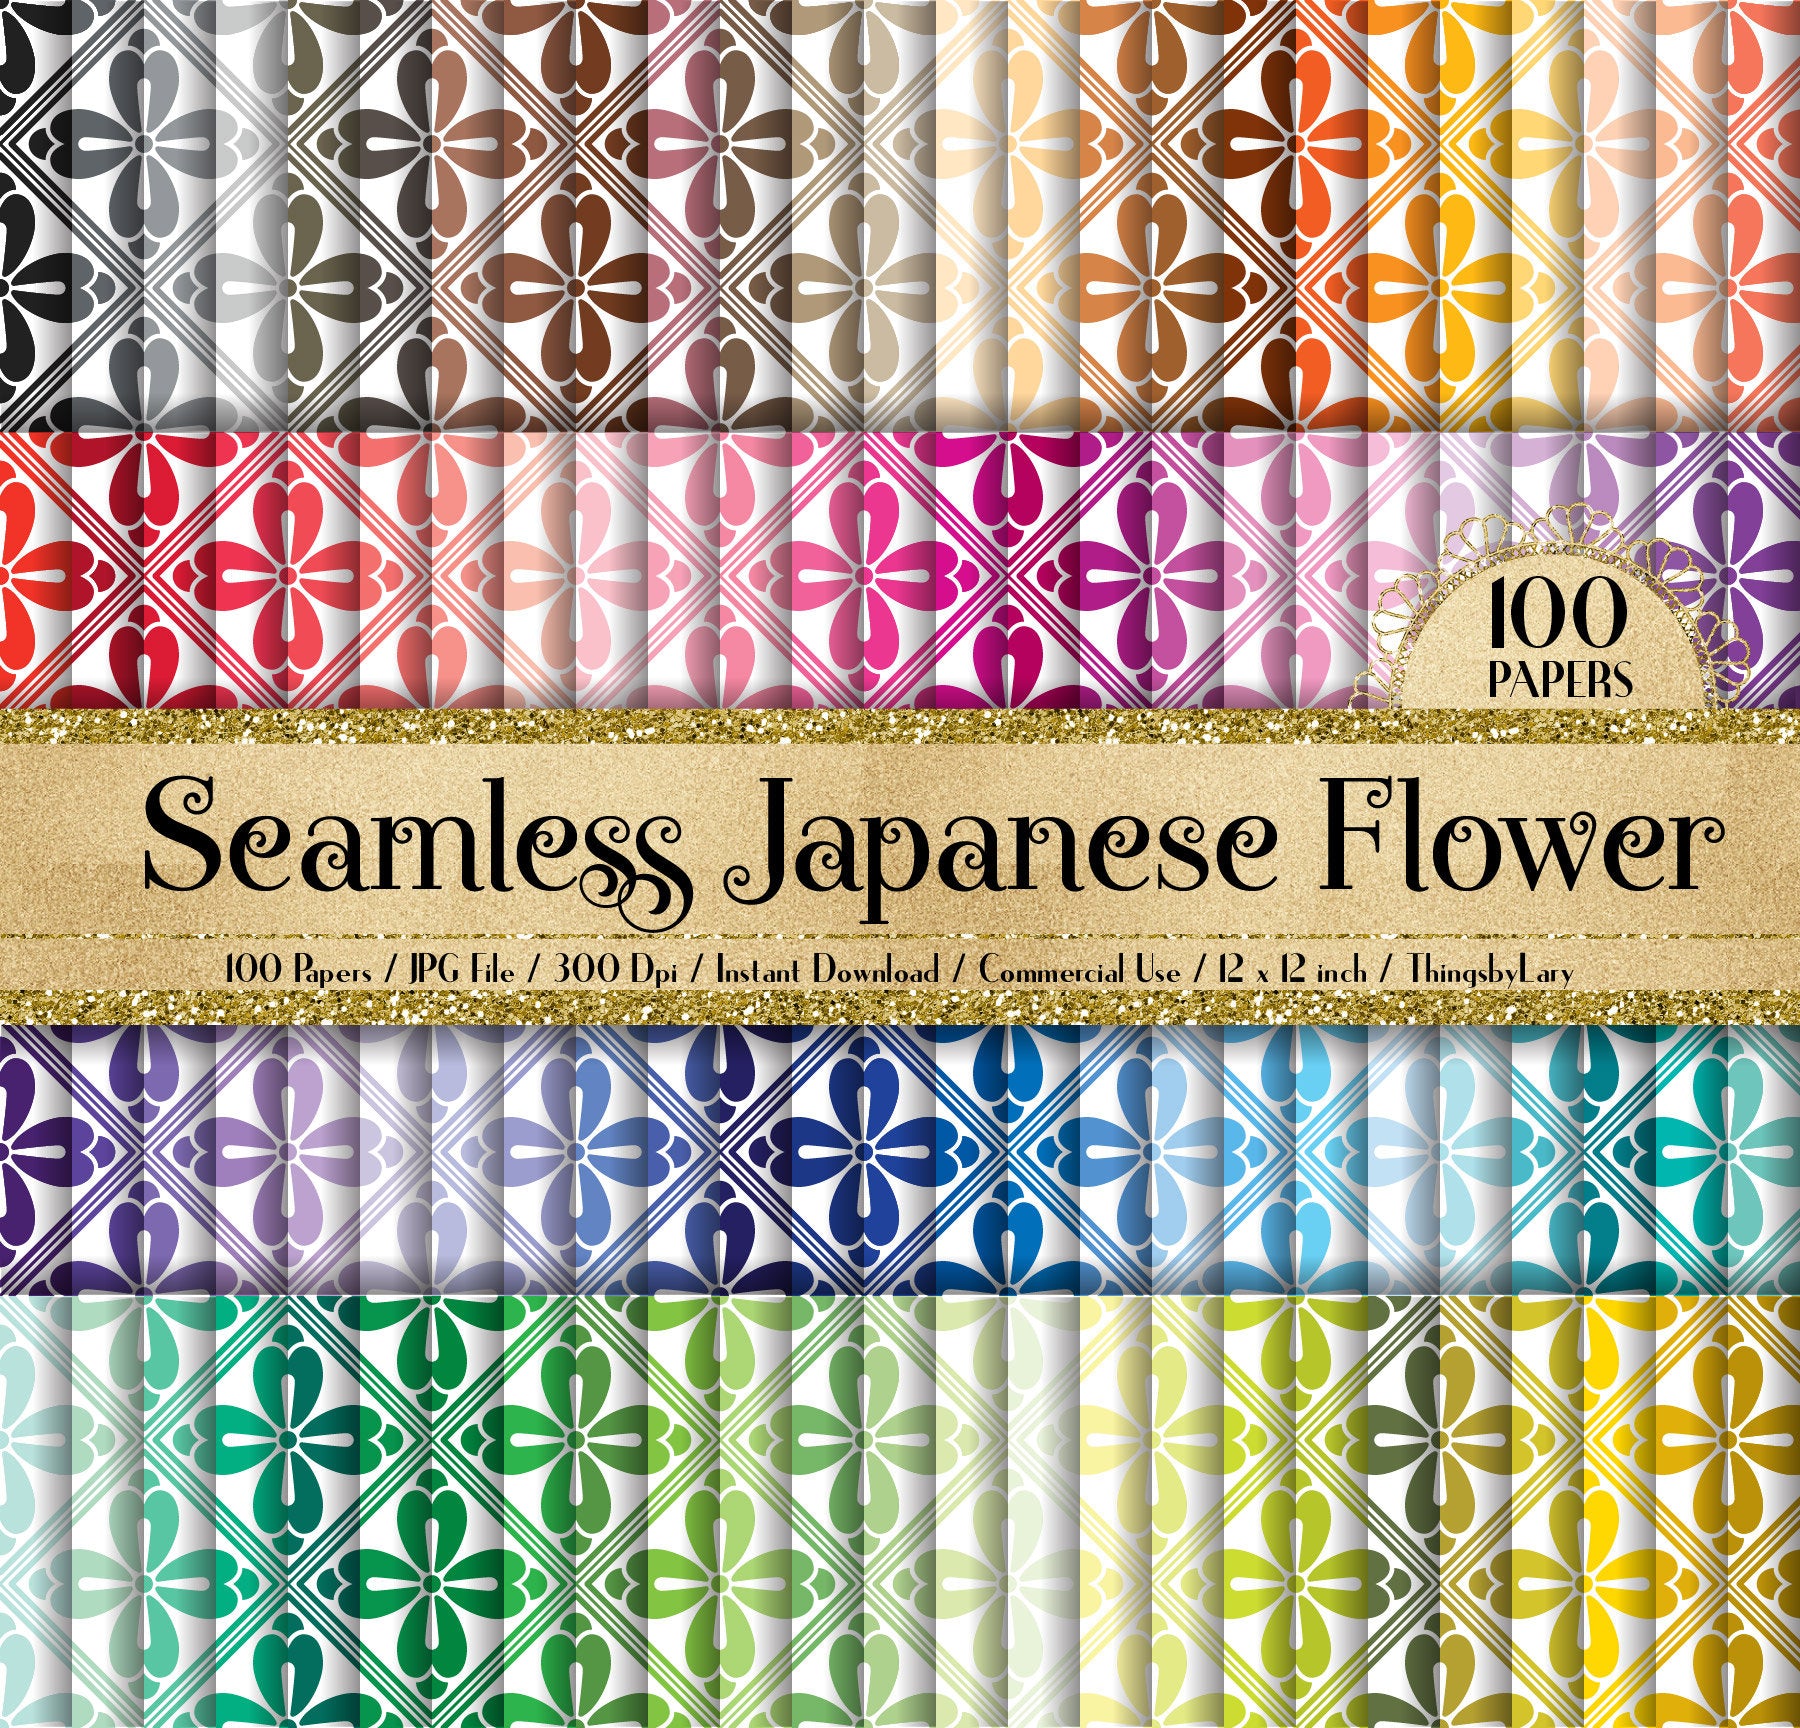 100 Seamless Japanese Flower Papers 12 inch 300 Dpi Instant Download Commercial Use, Planner Paper, Scrapbooking Japanese Kit, Seamless